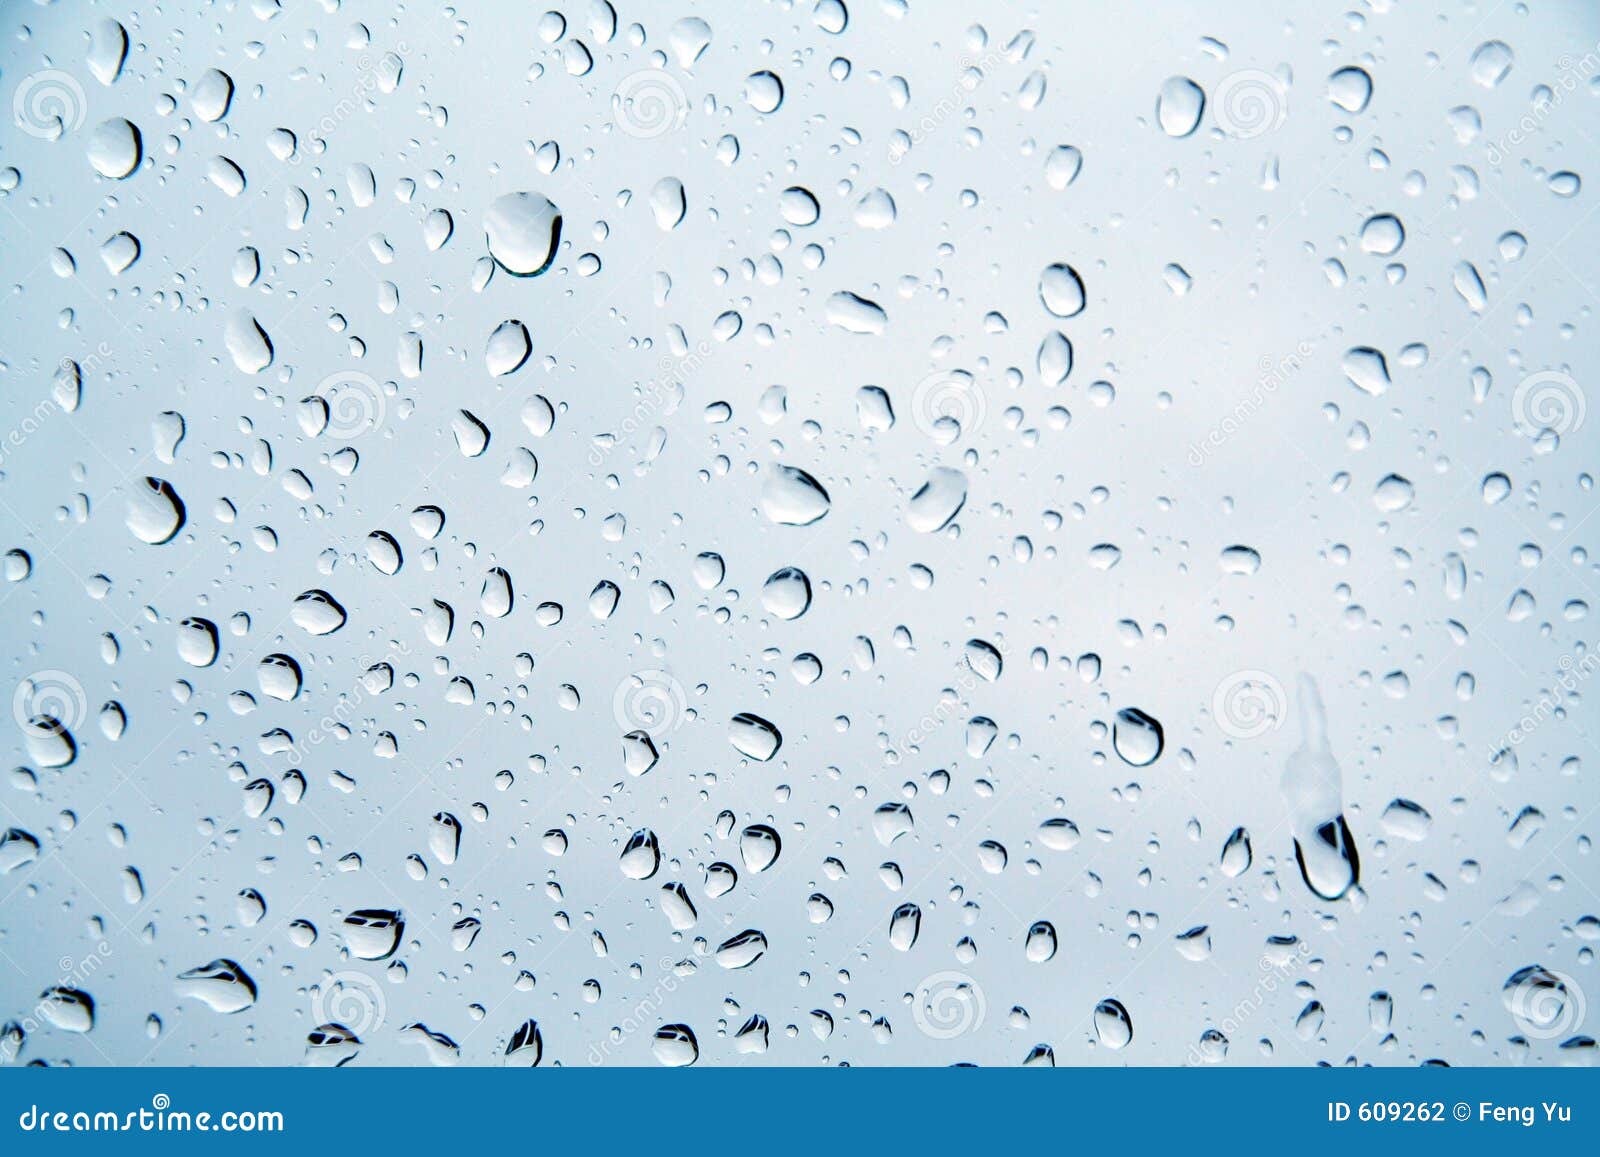 drops of water on a window pane